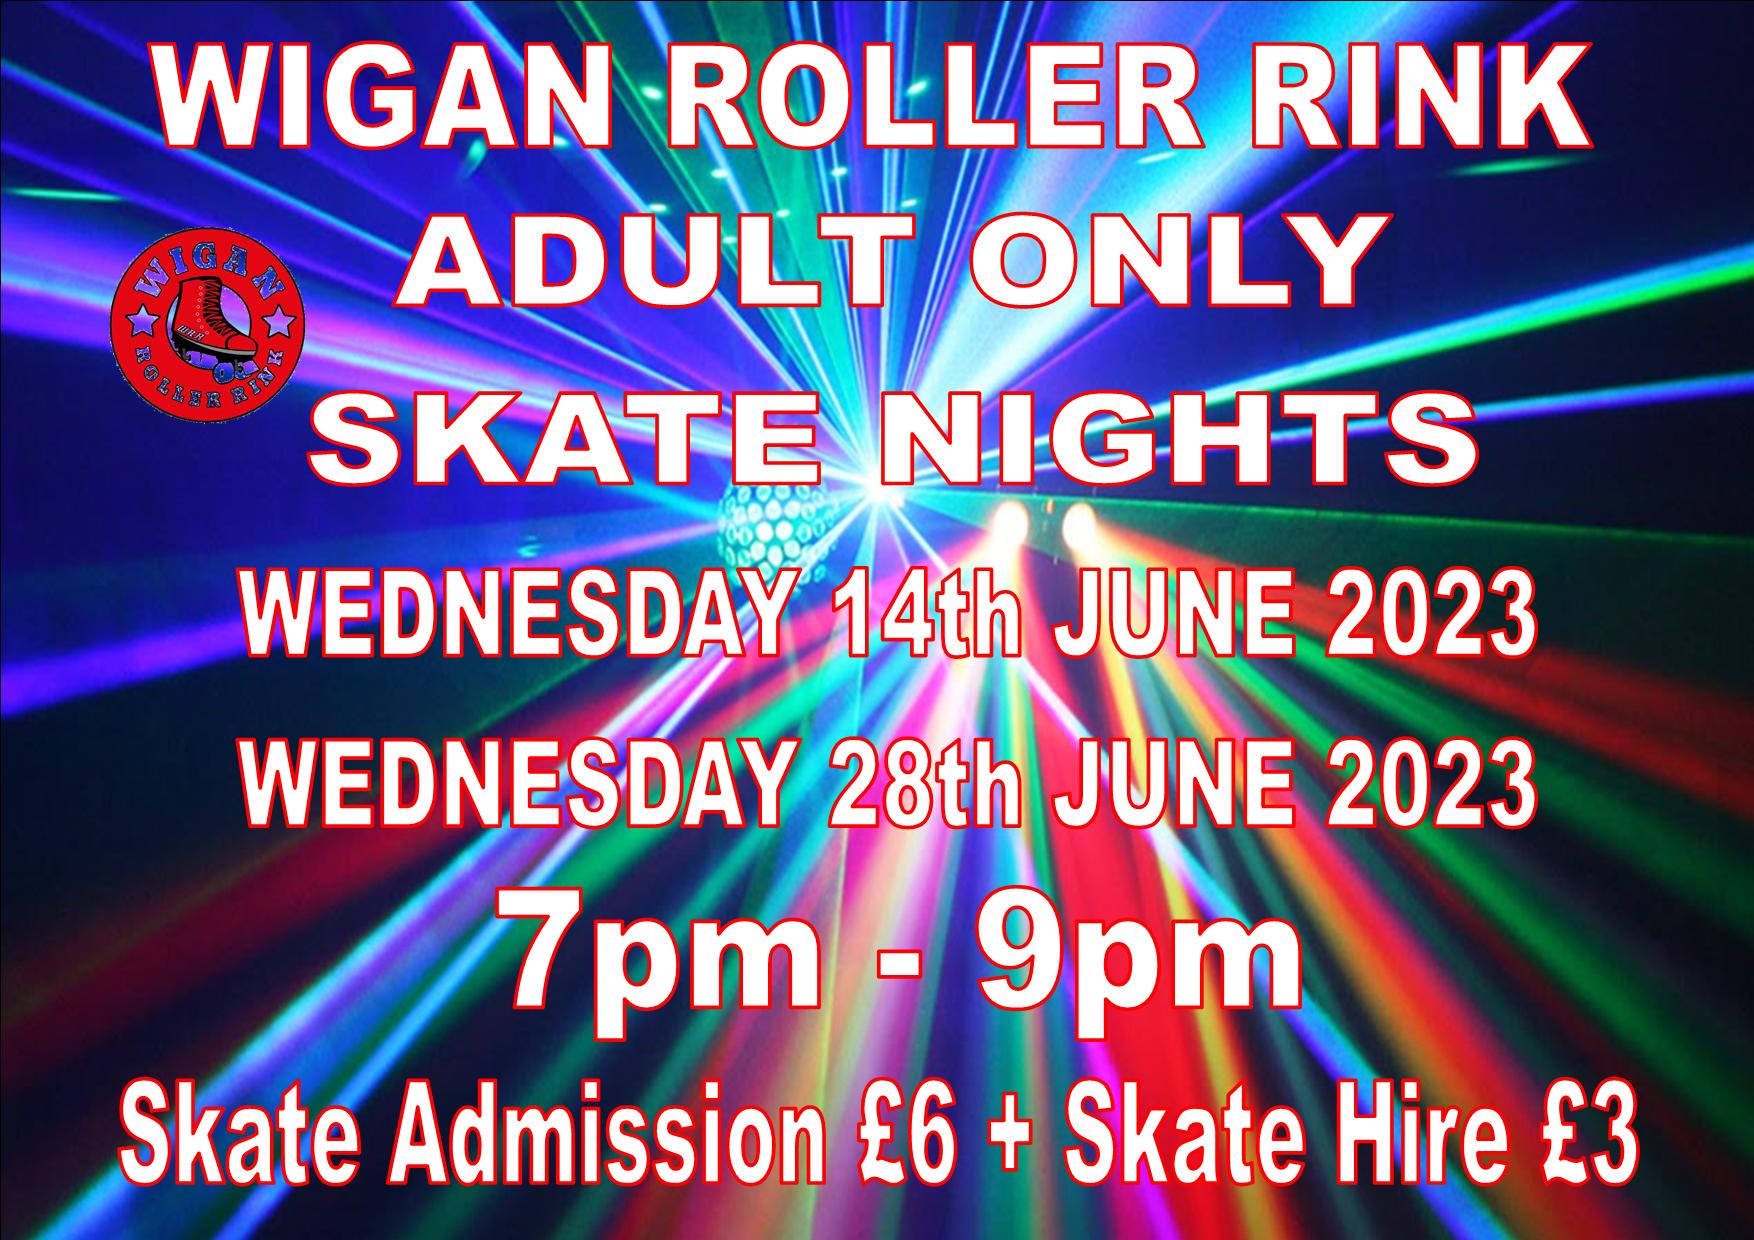 ADULT ONLY SKATE NIGHTS IN JUNE